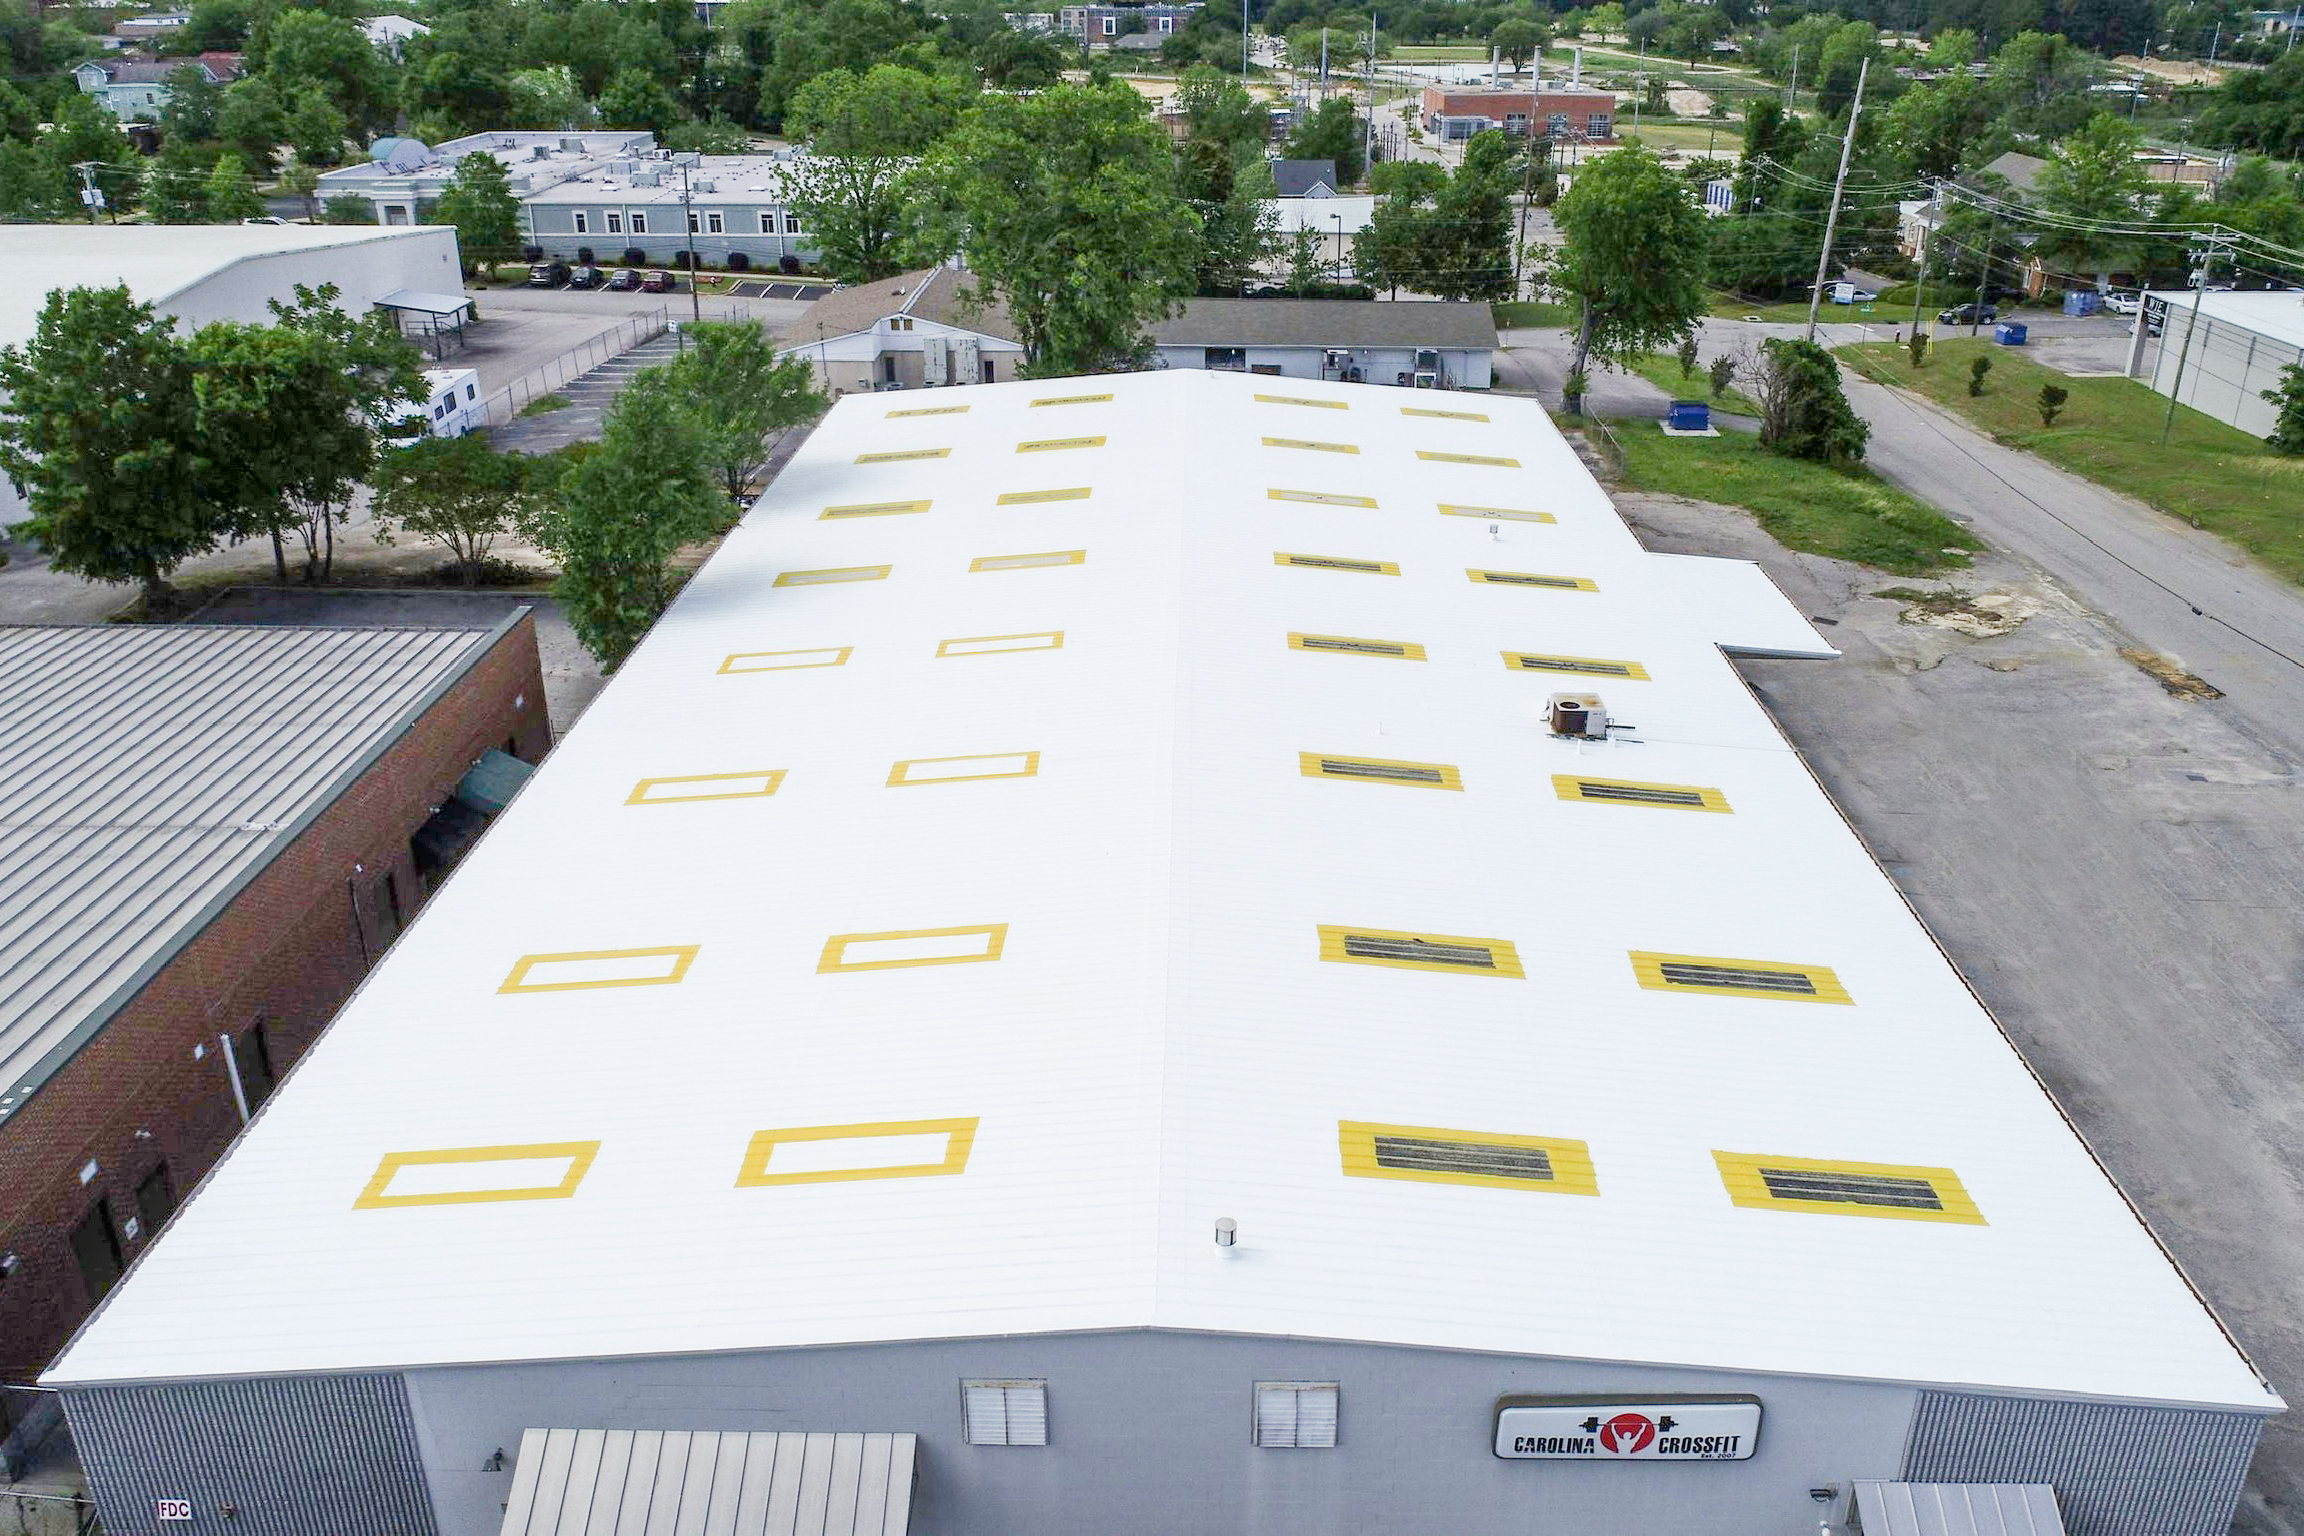 Looking for Best Commercial Roofing Company? Get an Estimate from us Today!